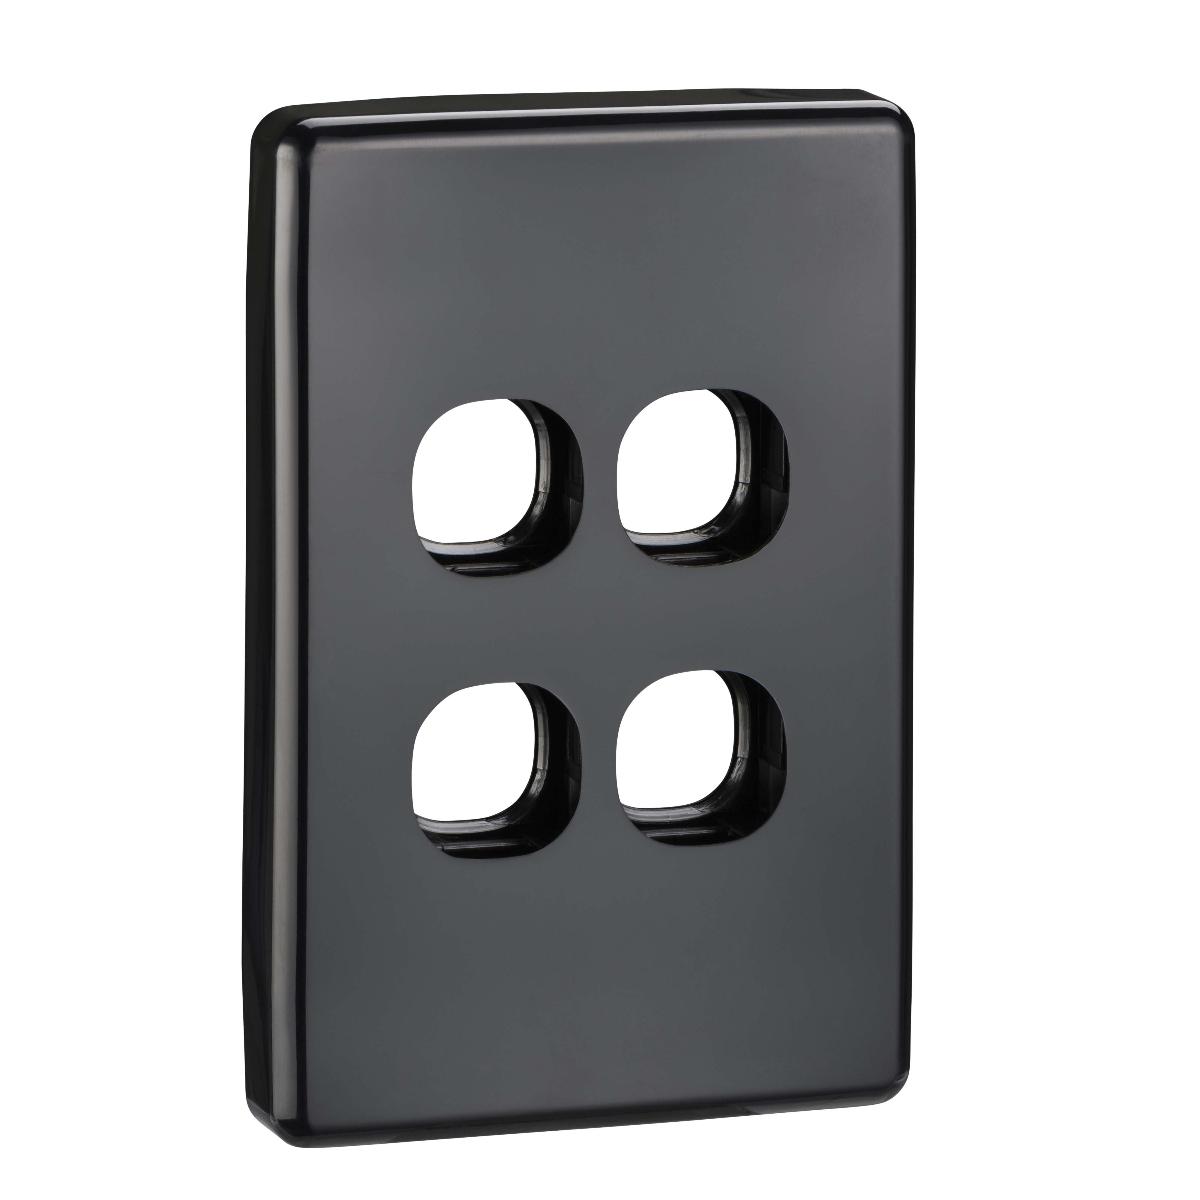 C2000 PLATE GRID & COVER 4G BLACK